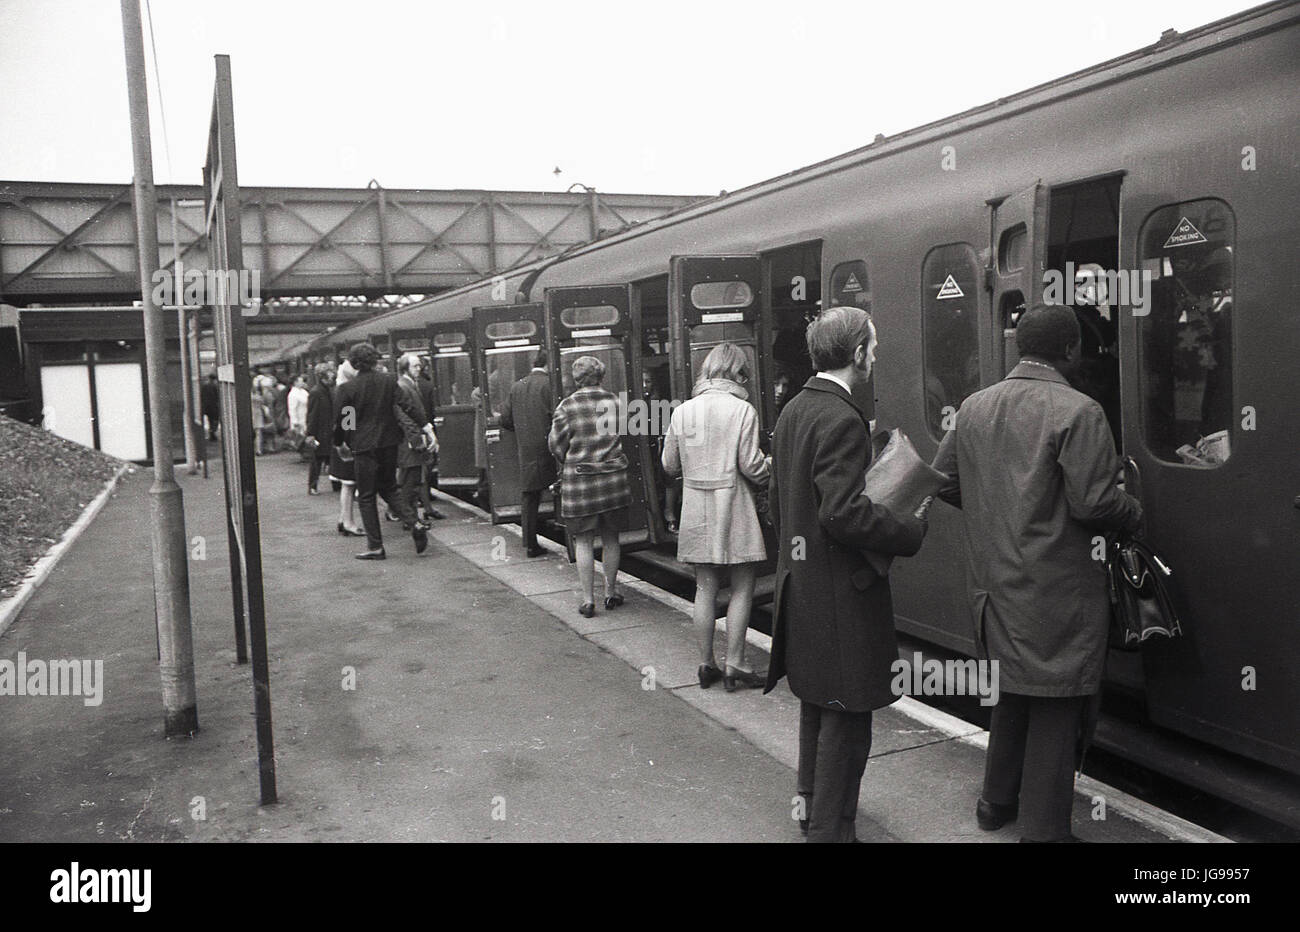 1972, British Rail, South East London, England, UK, Brockley train station, home to rail services from Southern Region. Picture shows a commuters boardin train carriages. Stock Photo